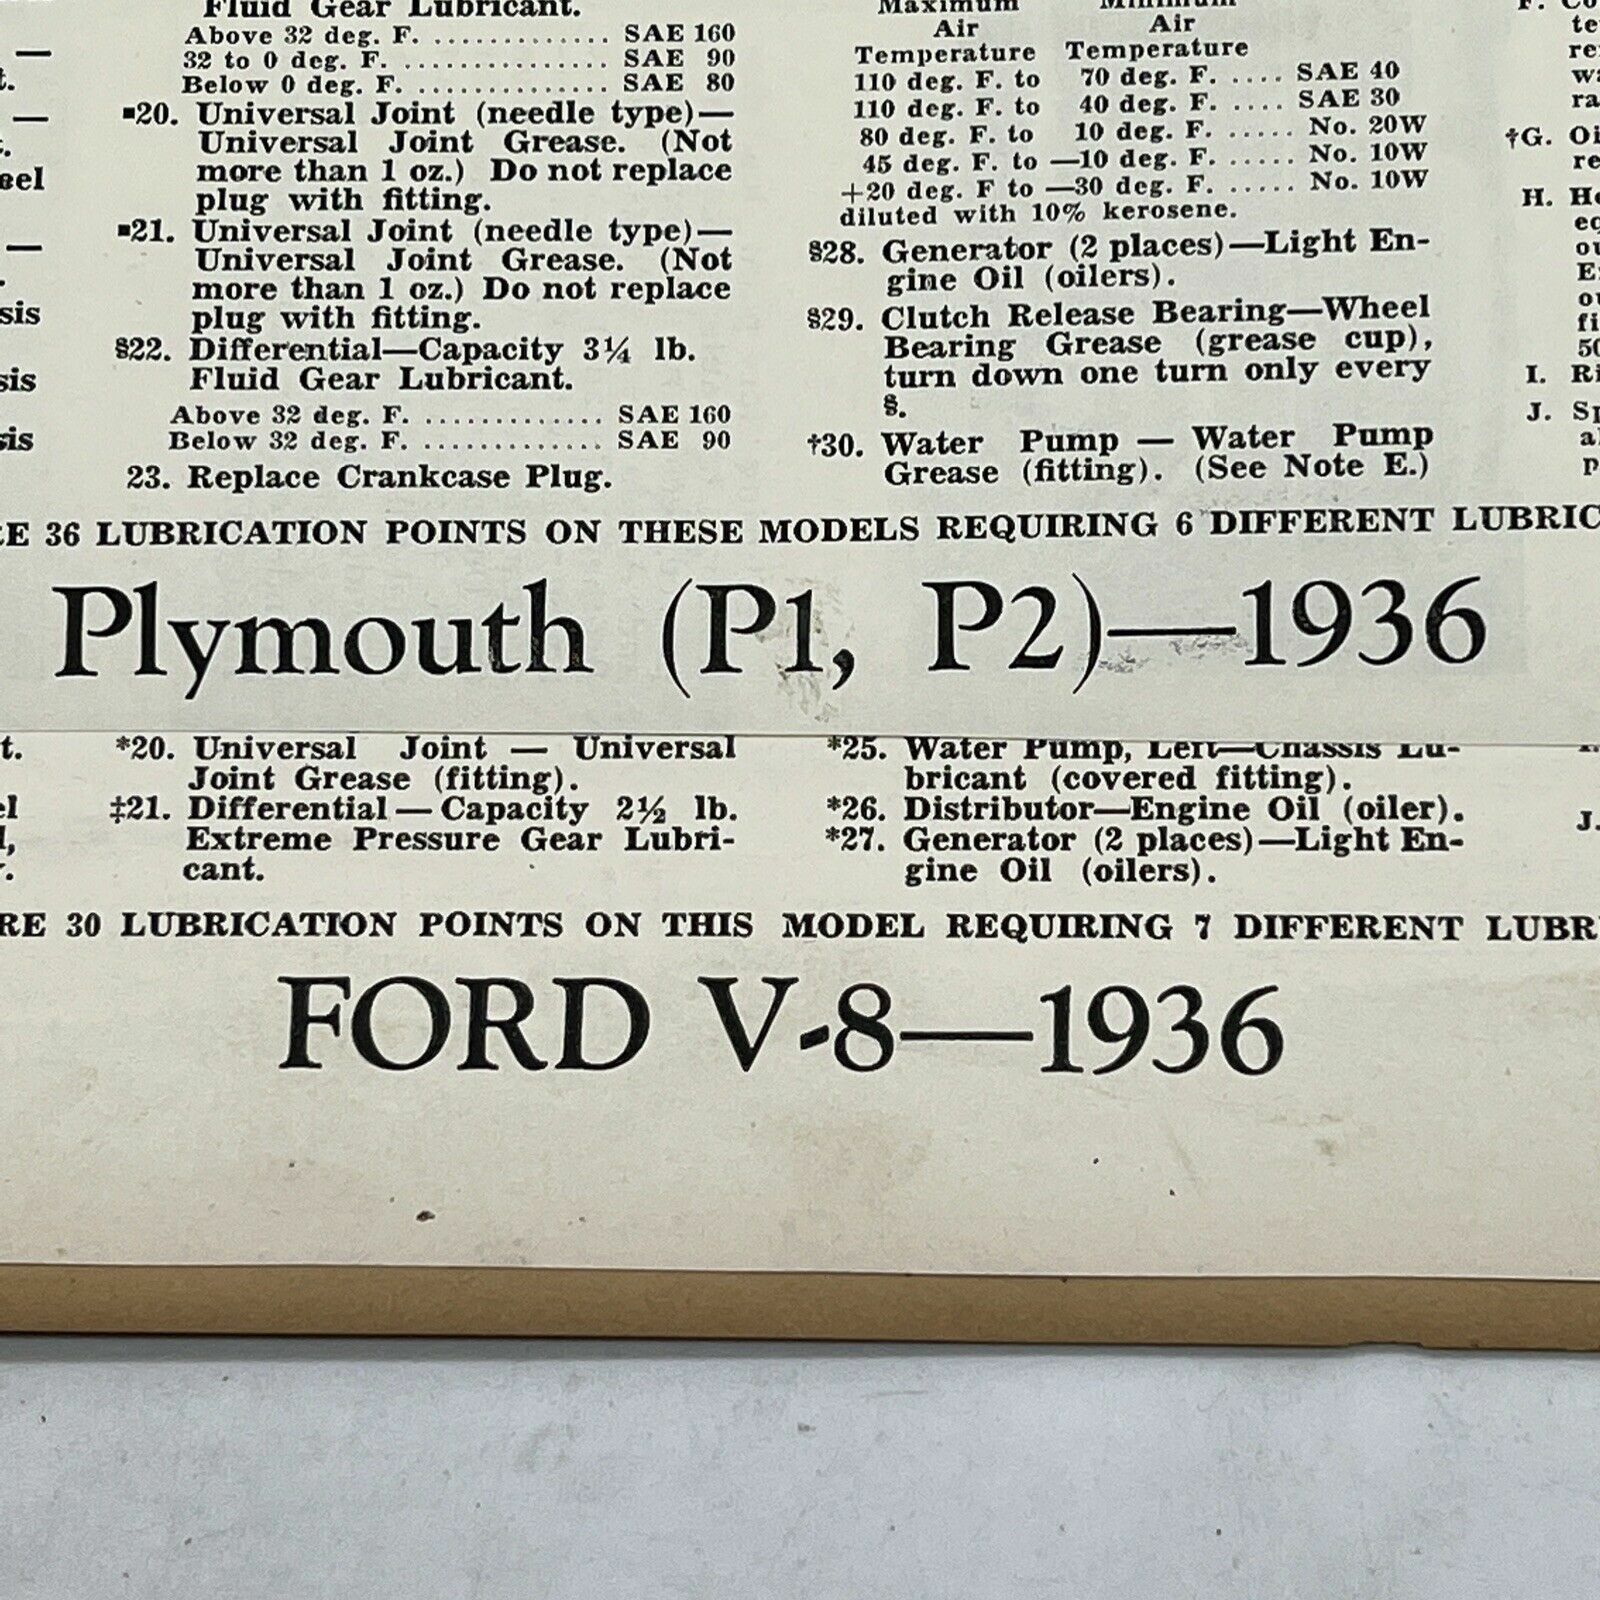 1936 AUG PLYMOUTH P1 P2 LUBRICATING CHEK-CHART Canadian Automotive Trade MAG